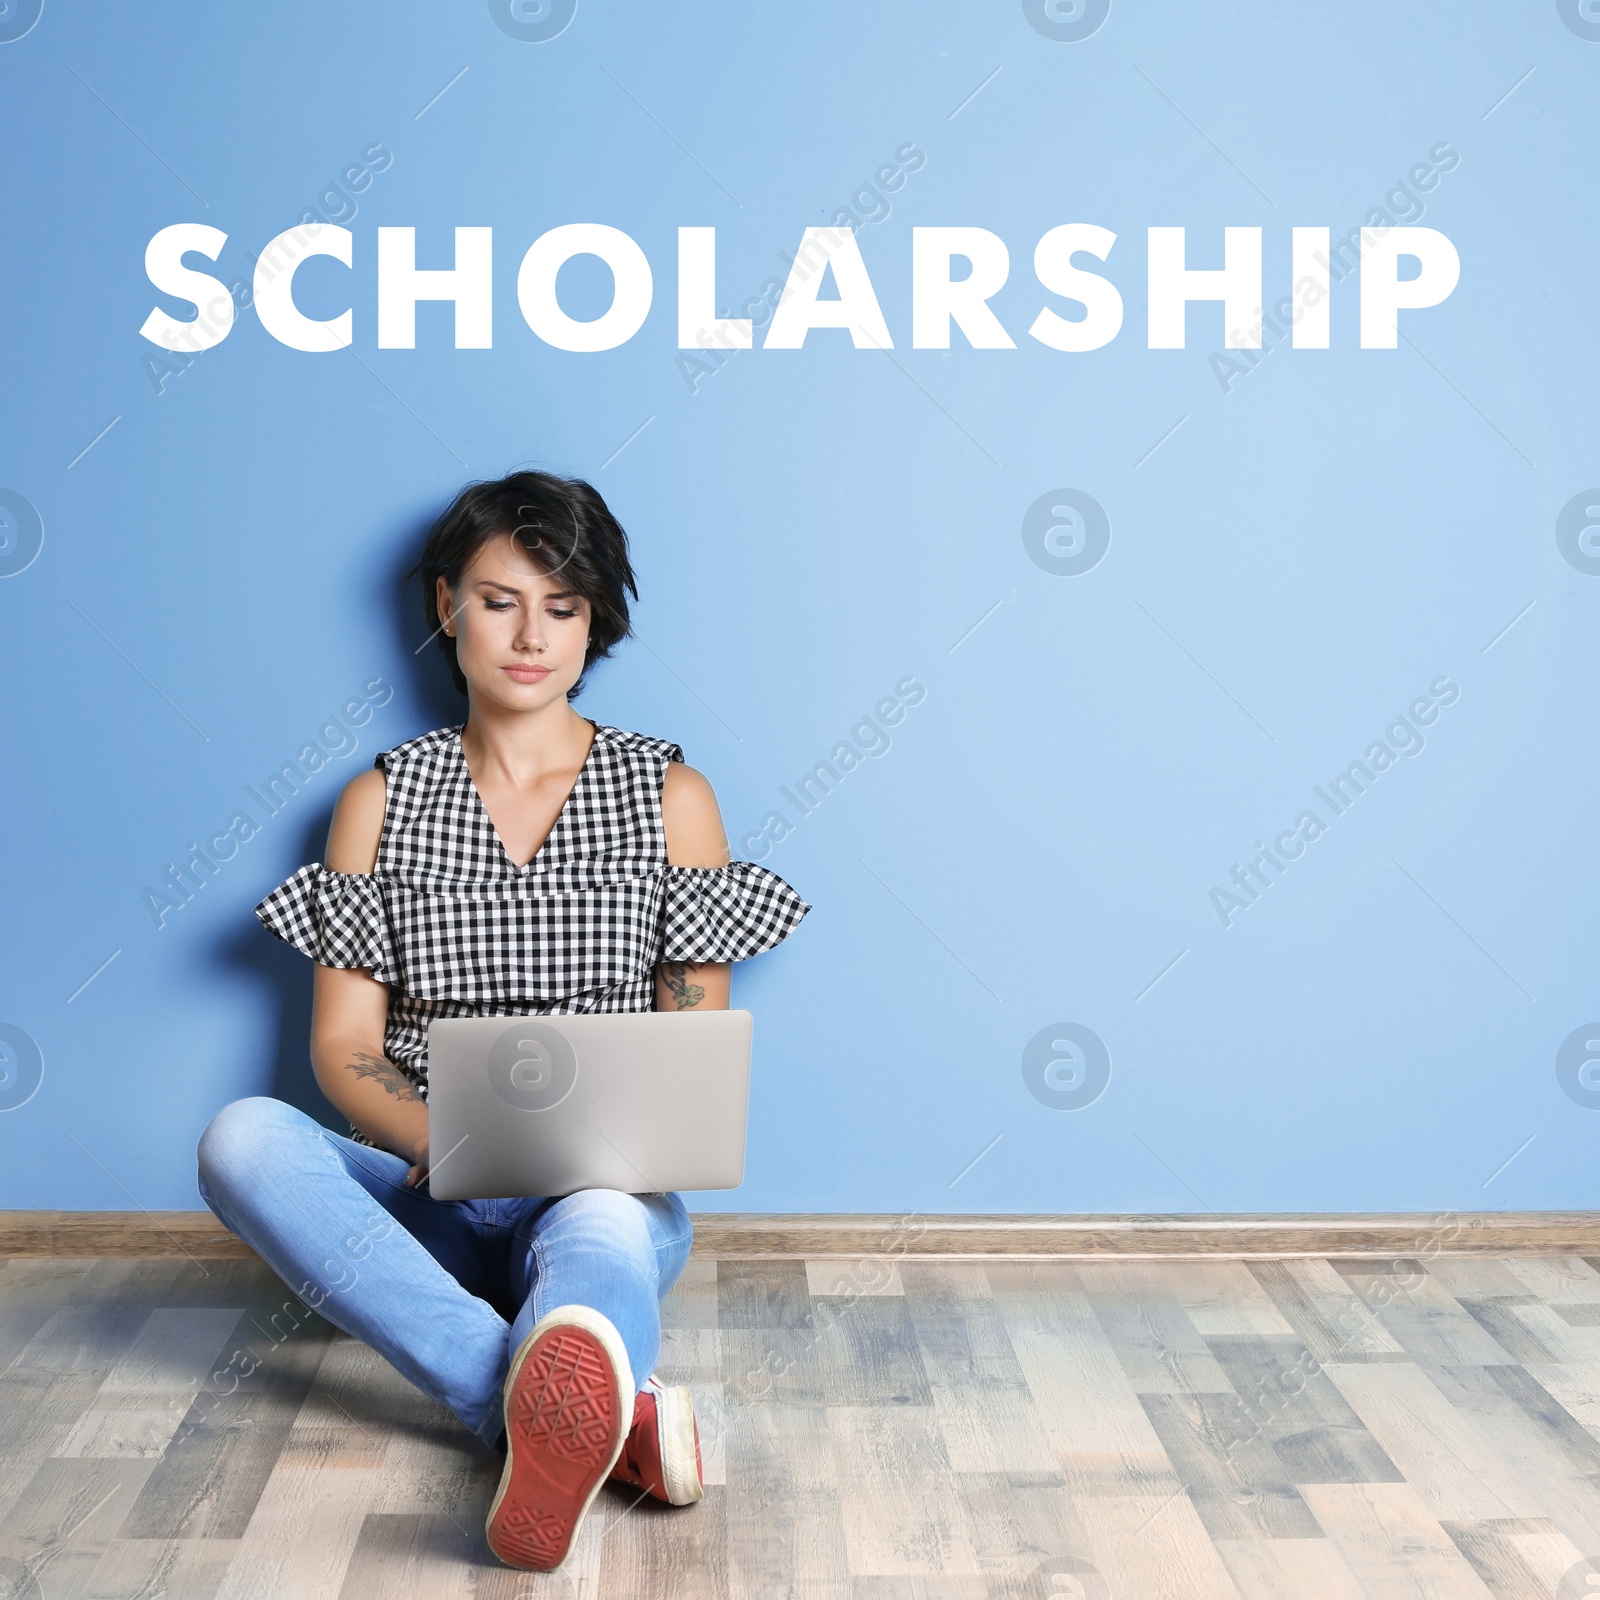 Image of Scholarship concept. Student with laptop sitting on floor near light blue wall